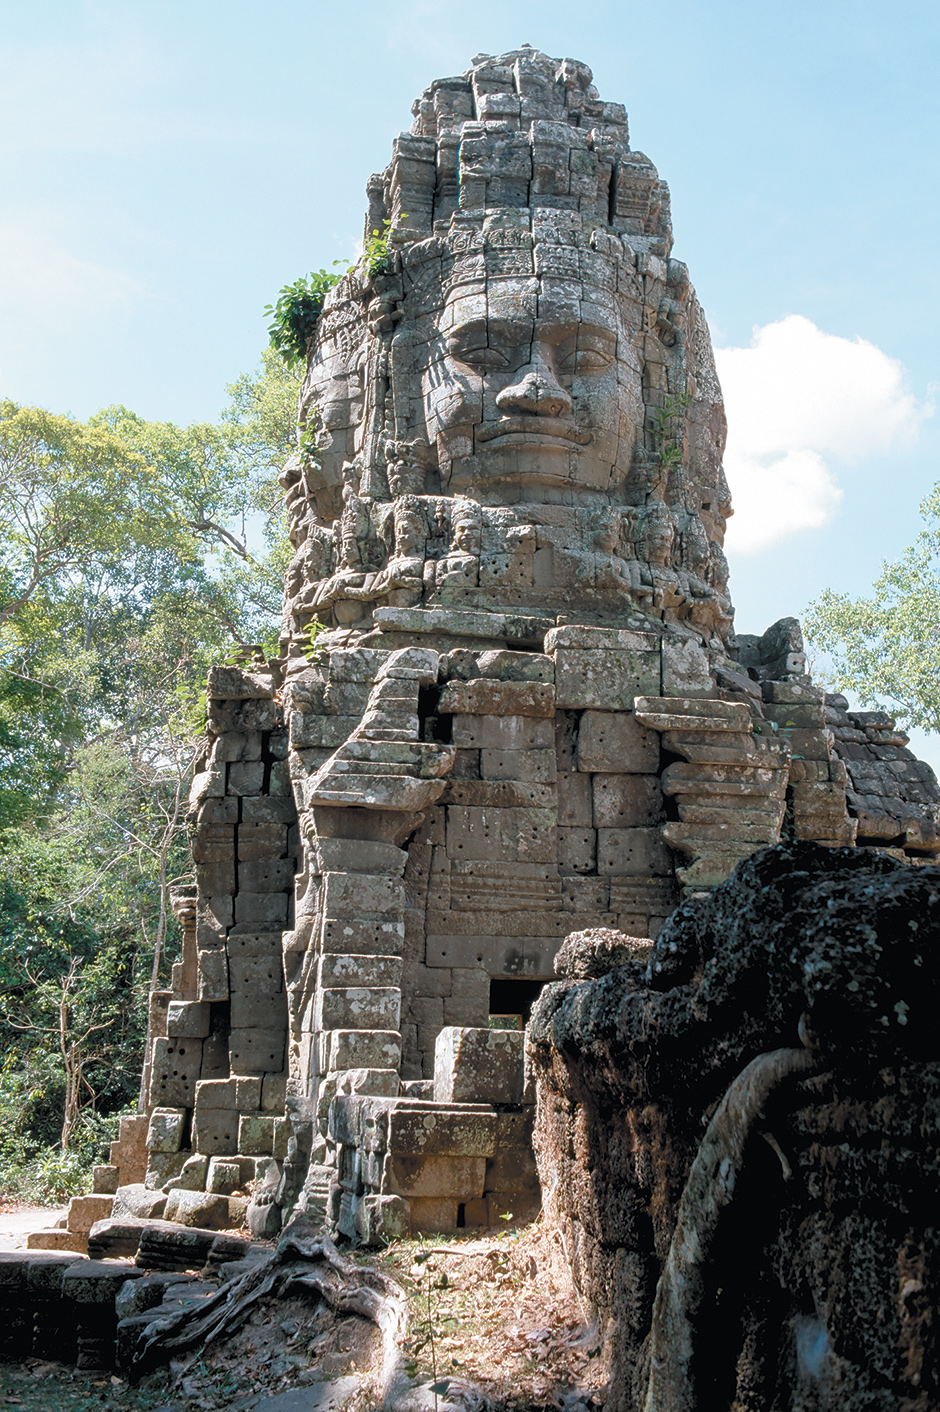 A tower at the Bayon temple, founded by the Khmer king Jayavarman VII, Angkor, Cambodia, late twelfth–early thirteenth centuries